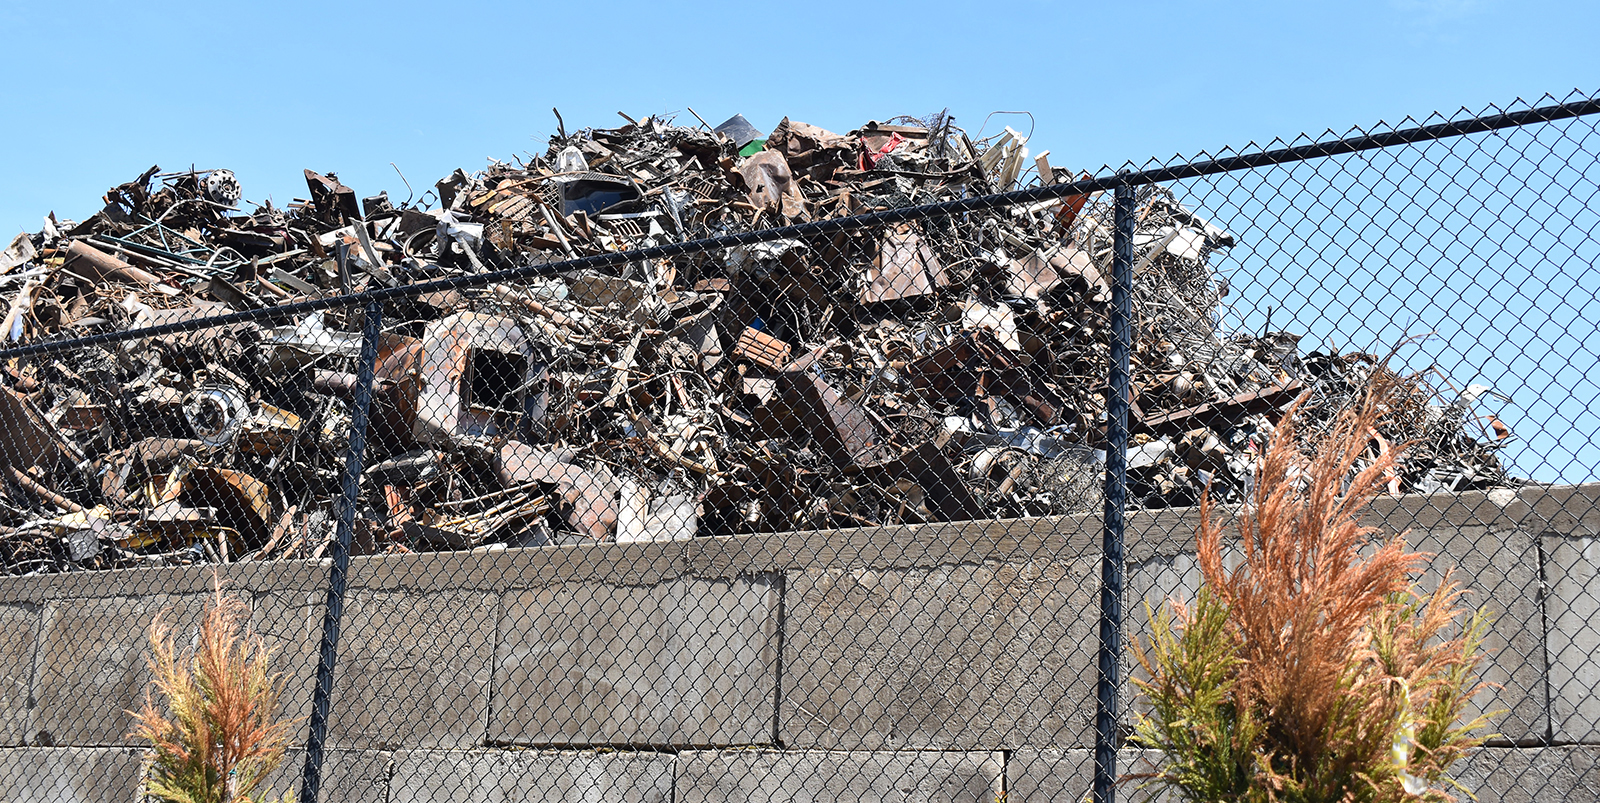 The pollution produced and stored along the Providence waterfront has and is having negative impacts on two nearby neighborhoods. (Frank Carini/ecoRI News)